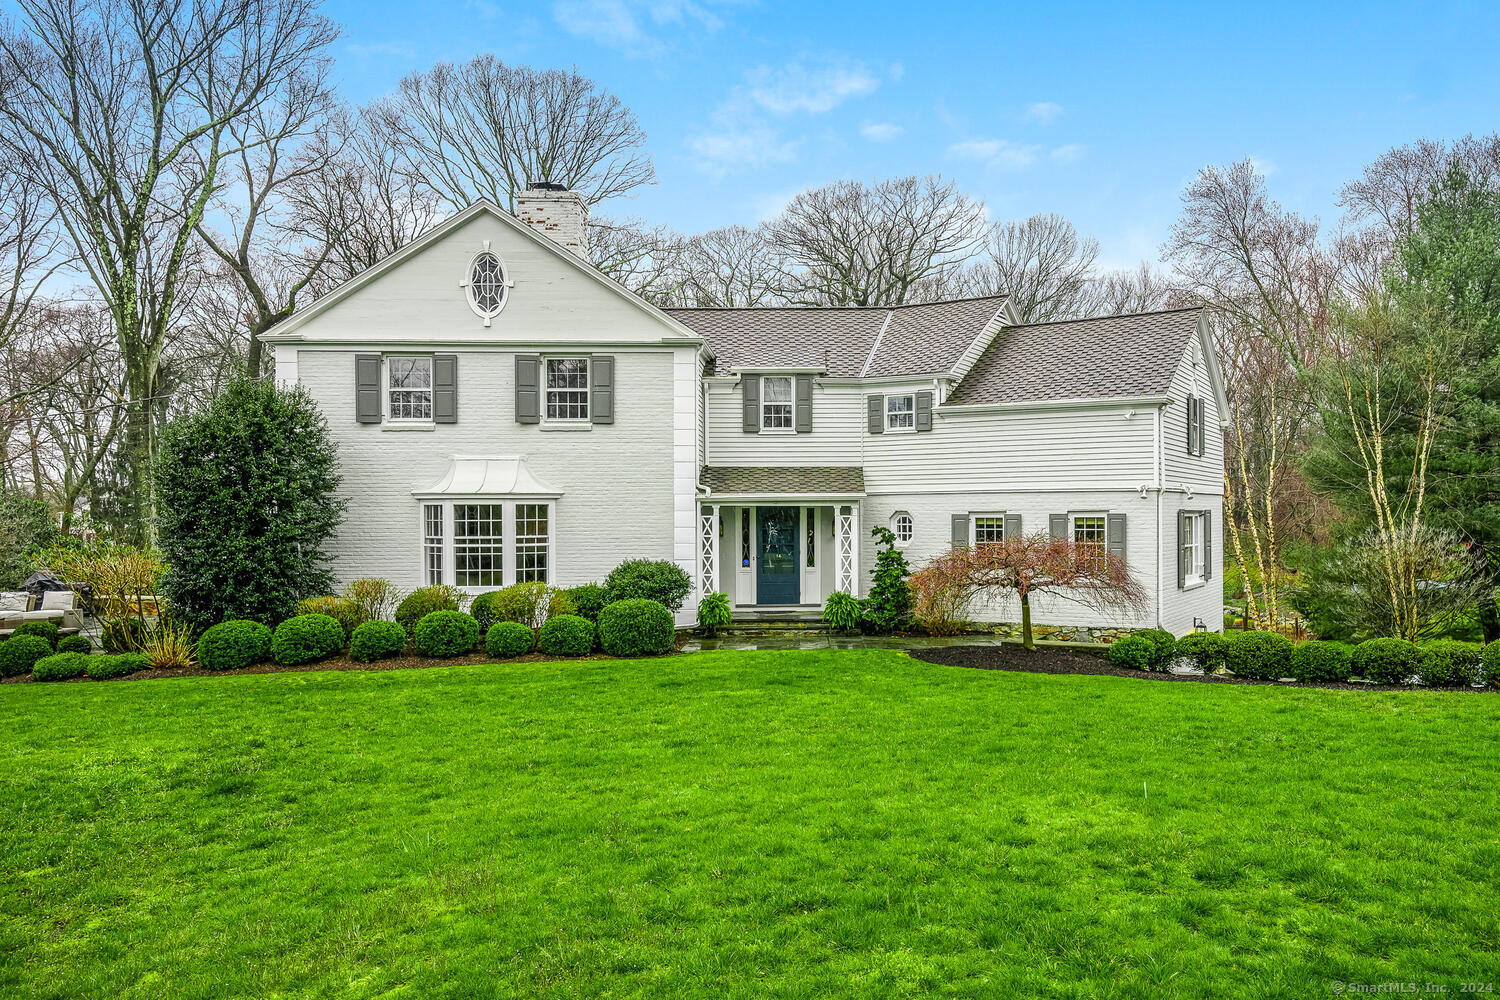 Welcome Home to 761 Round Hill Rd! Quintessential 1940 Colonial treasure is a unique combination of charm & sophistication AND a coveted 1.24ac Winton Park setting. Inviting & well maintained 4 Bdrm, 3.5 Ba home w/just under 4,000sq ft is a delight & a wonderful place to entertain in every season. Traditional features such as hardwood floors, custom built-ins & generous moldings accent well proportioned rooms to offer a gracious & warm appeal throughout. The Living Rm is architecturally bold w/a wood burning fpl, bookshelves & natural light pouring in the bow window. Enjoy holiday celebrations or intimate dinners in the Dining Rm or the E-I-K complete w/generous cabinetry, Wet Bar & a view of the picturesque property. Finishing off the Main Level is the Den, a quiet place to work from home or enjoy a movie night. Relax w/your morning coffee in the Sunroom or continue out to the stone patio & feel your blood pressure drop as you soak in the spectacular greenery & gardens. The 2nd floor offers the Primary Suite w/generous his & hers closets & a private Balcony overlooking the Patio & Gardens. 3 addt'l Bdrms are generously sized w/2 Full Ba. LL Rec/Playrm combines beautifully w/Laundry Rm, Mudrm & loads of closet space to handle your active lifestyle. 5 ways to access the outdoor Patio, Decks, Garage & backyd not to mention the "Man Cave" or "She Shed" of your dreams! Minutes to everything downtown Fairfield has to offer.